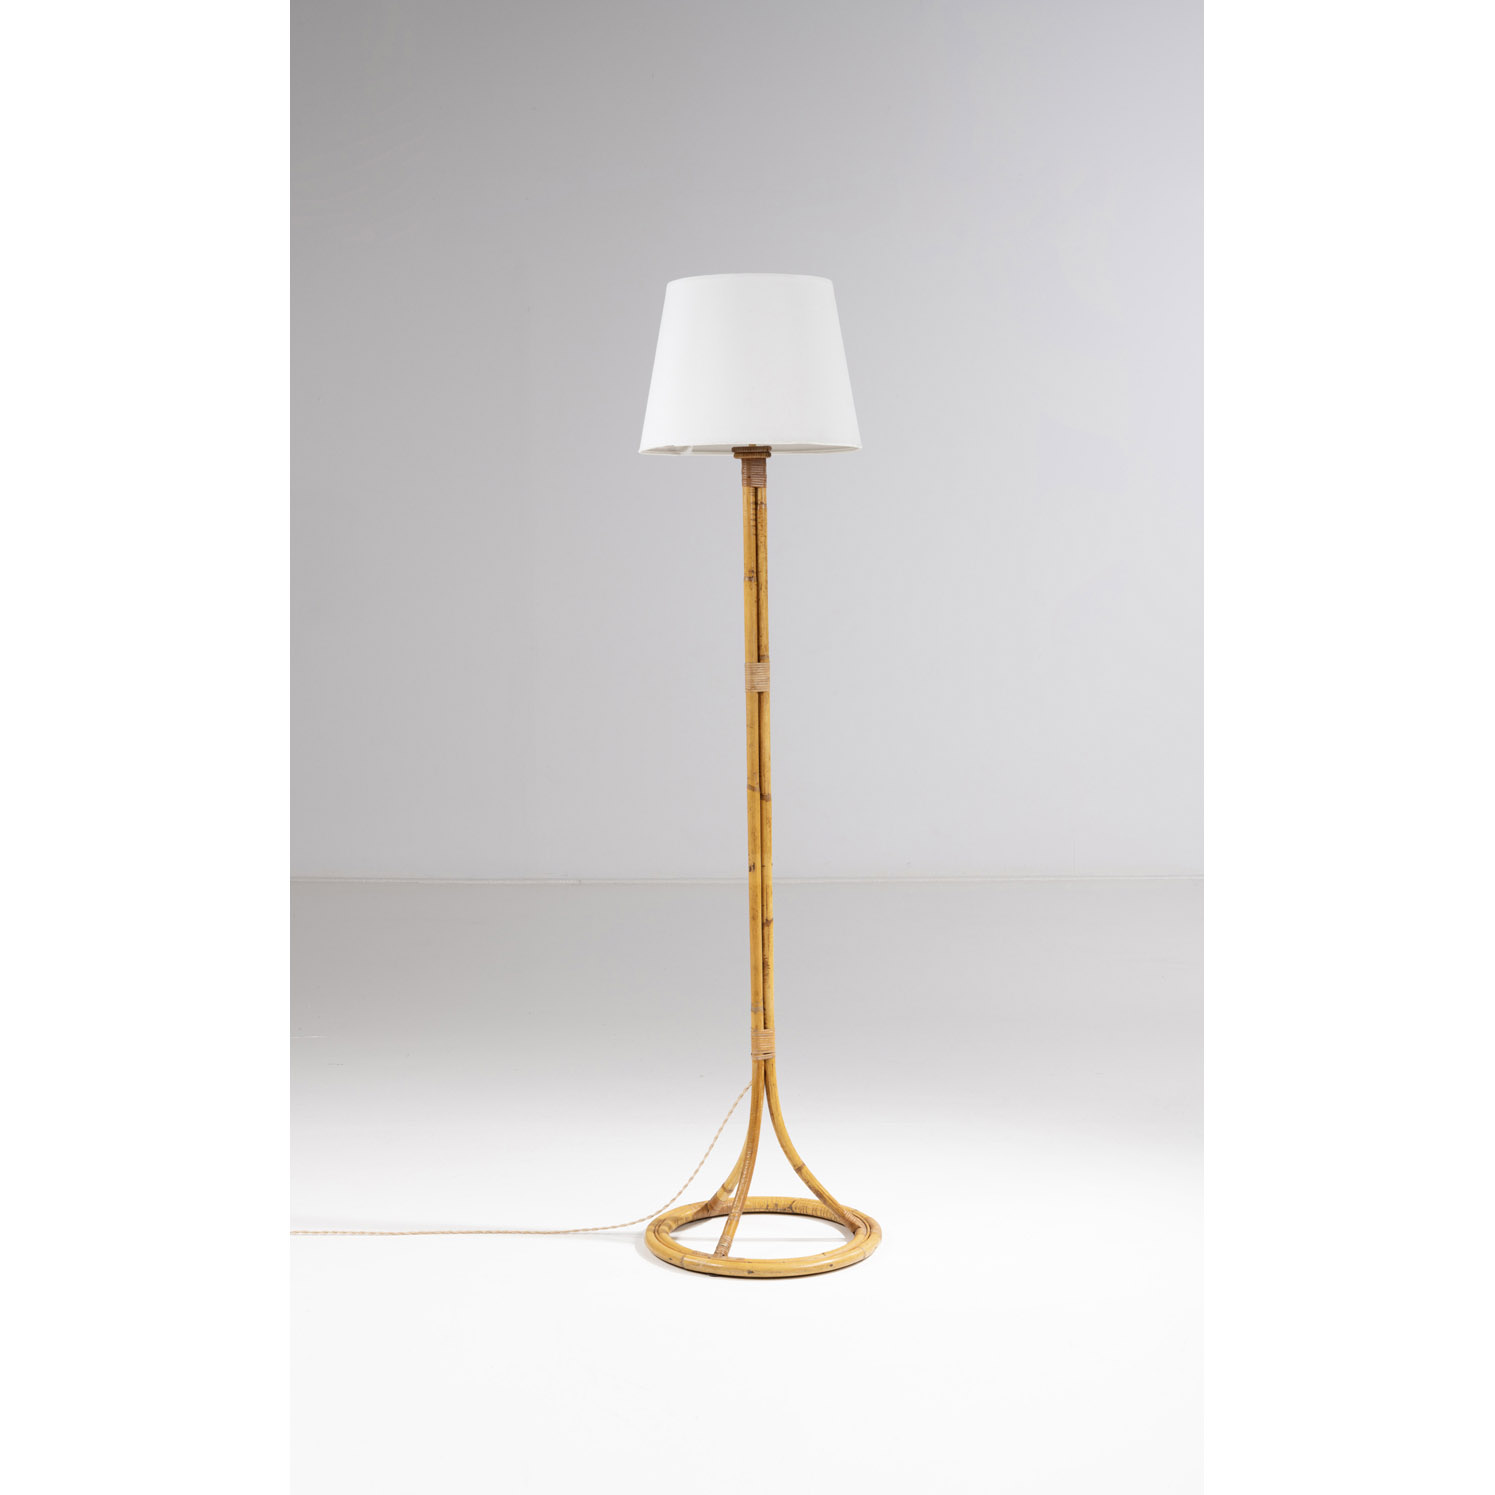 French production (20th c.) Floor lamp